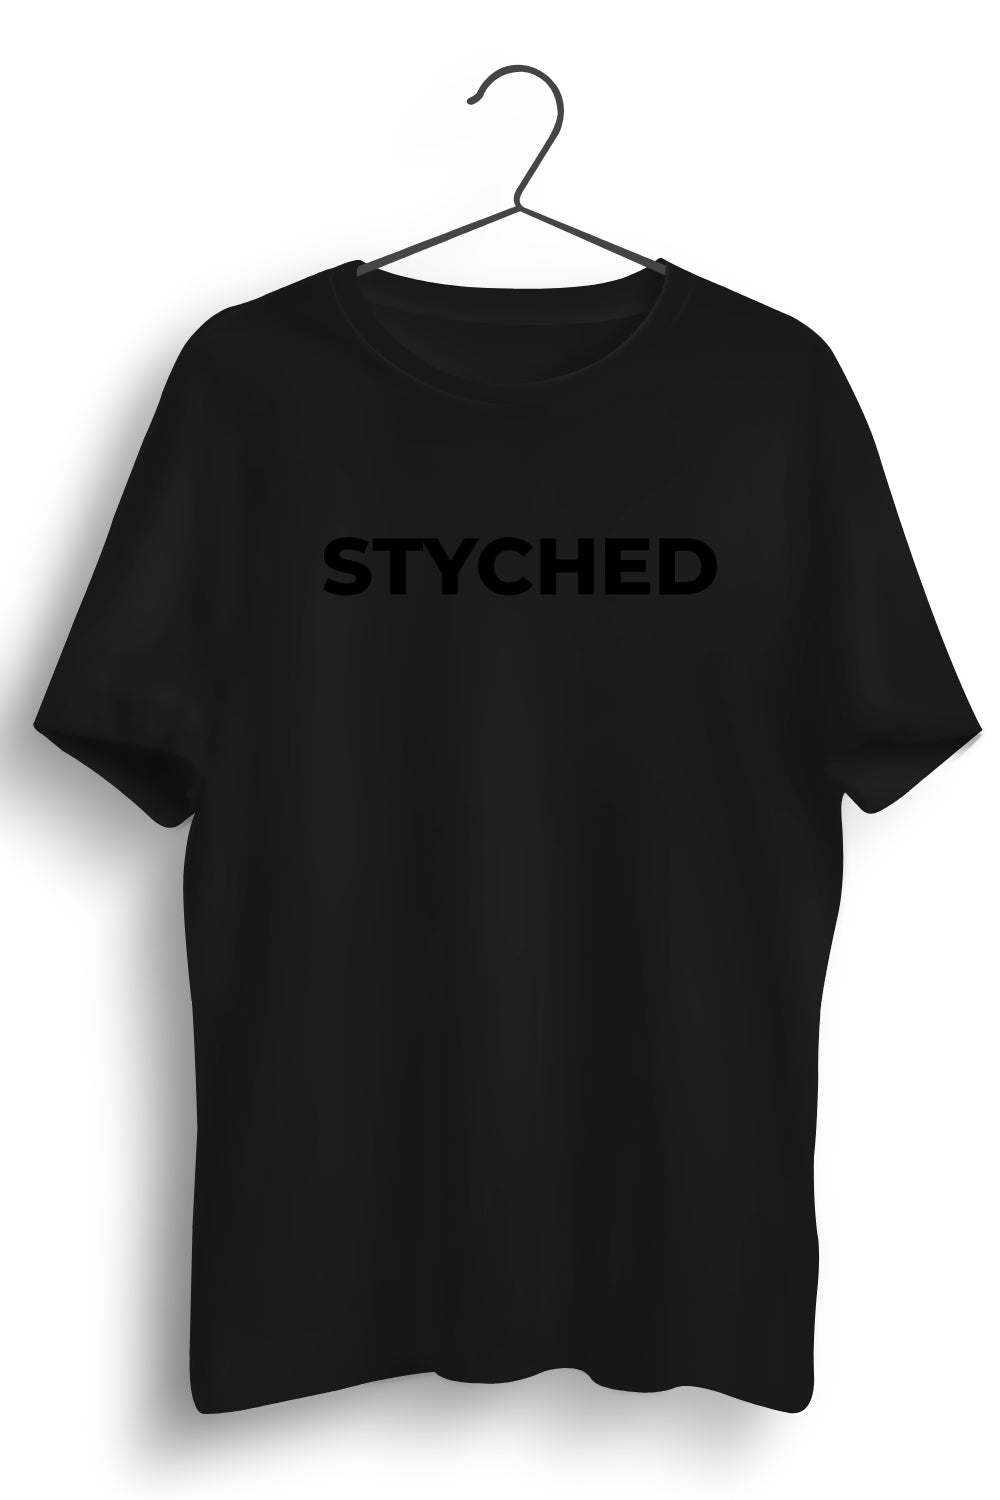 Paytm Exclusive - Styched Font All Black Tshirt